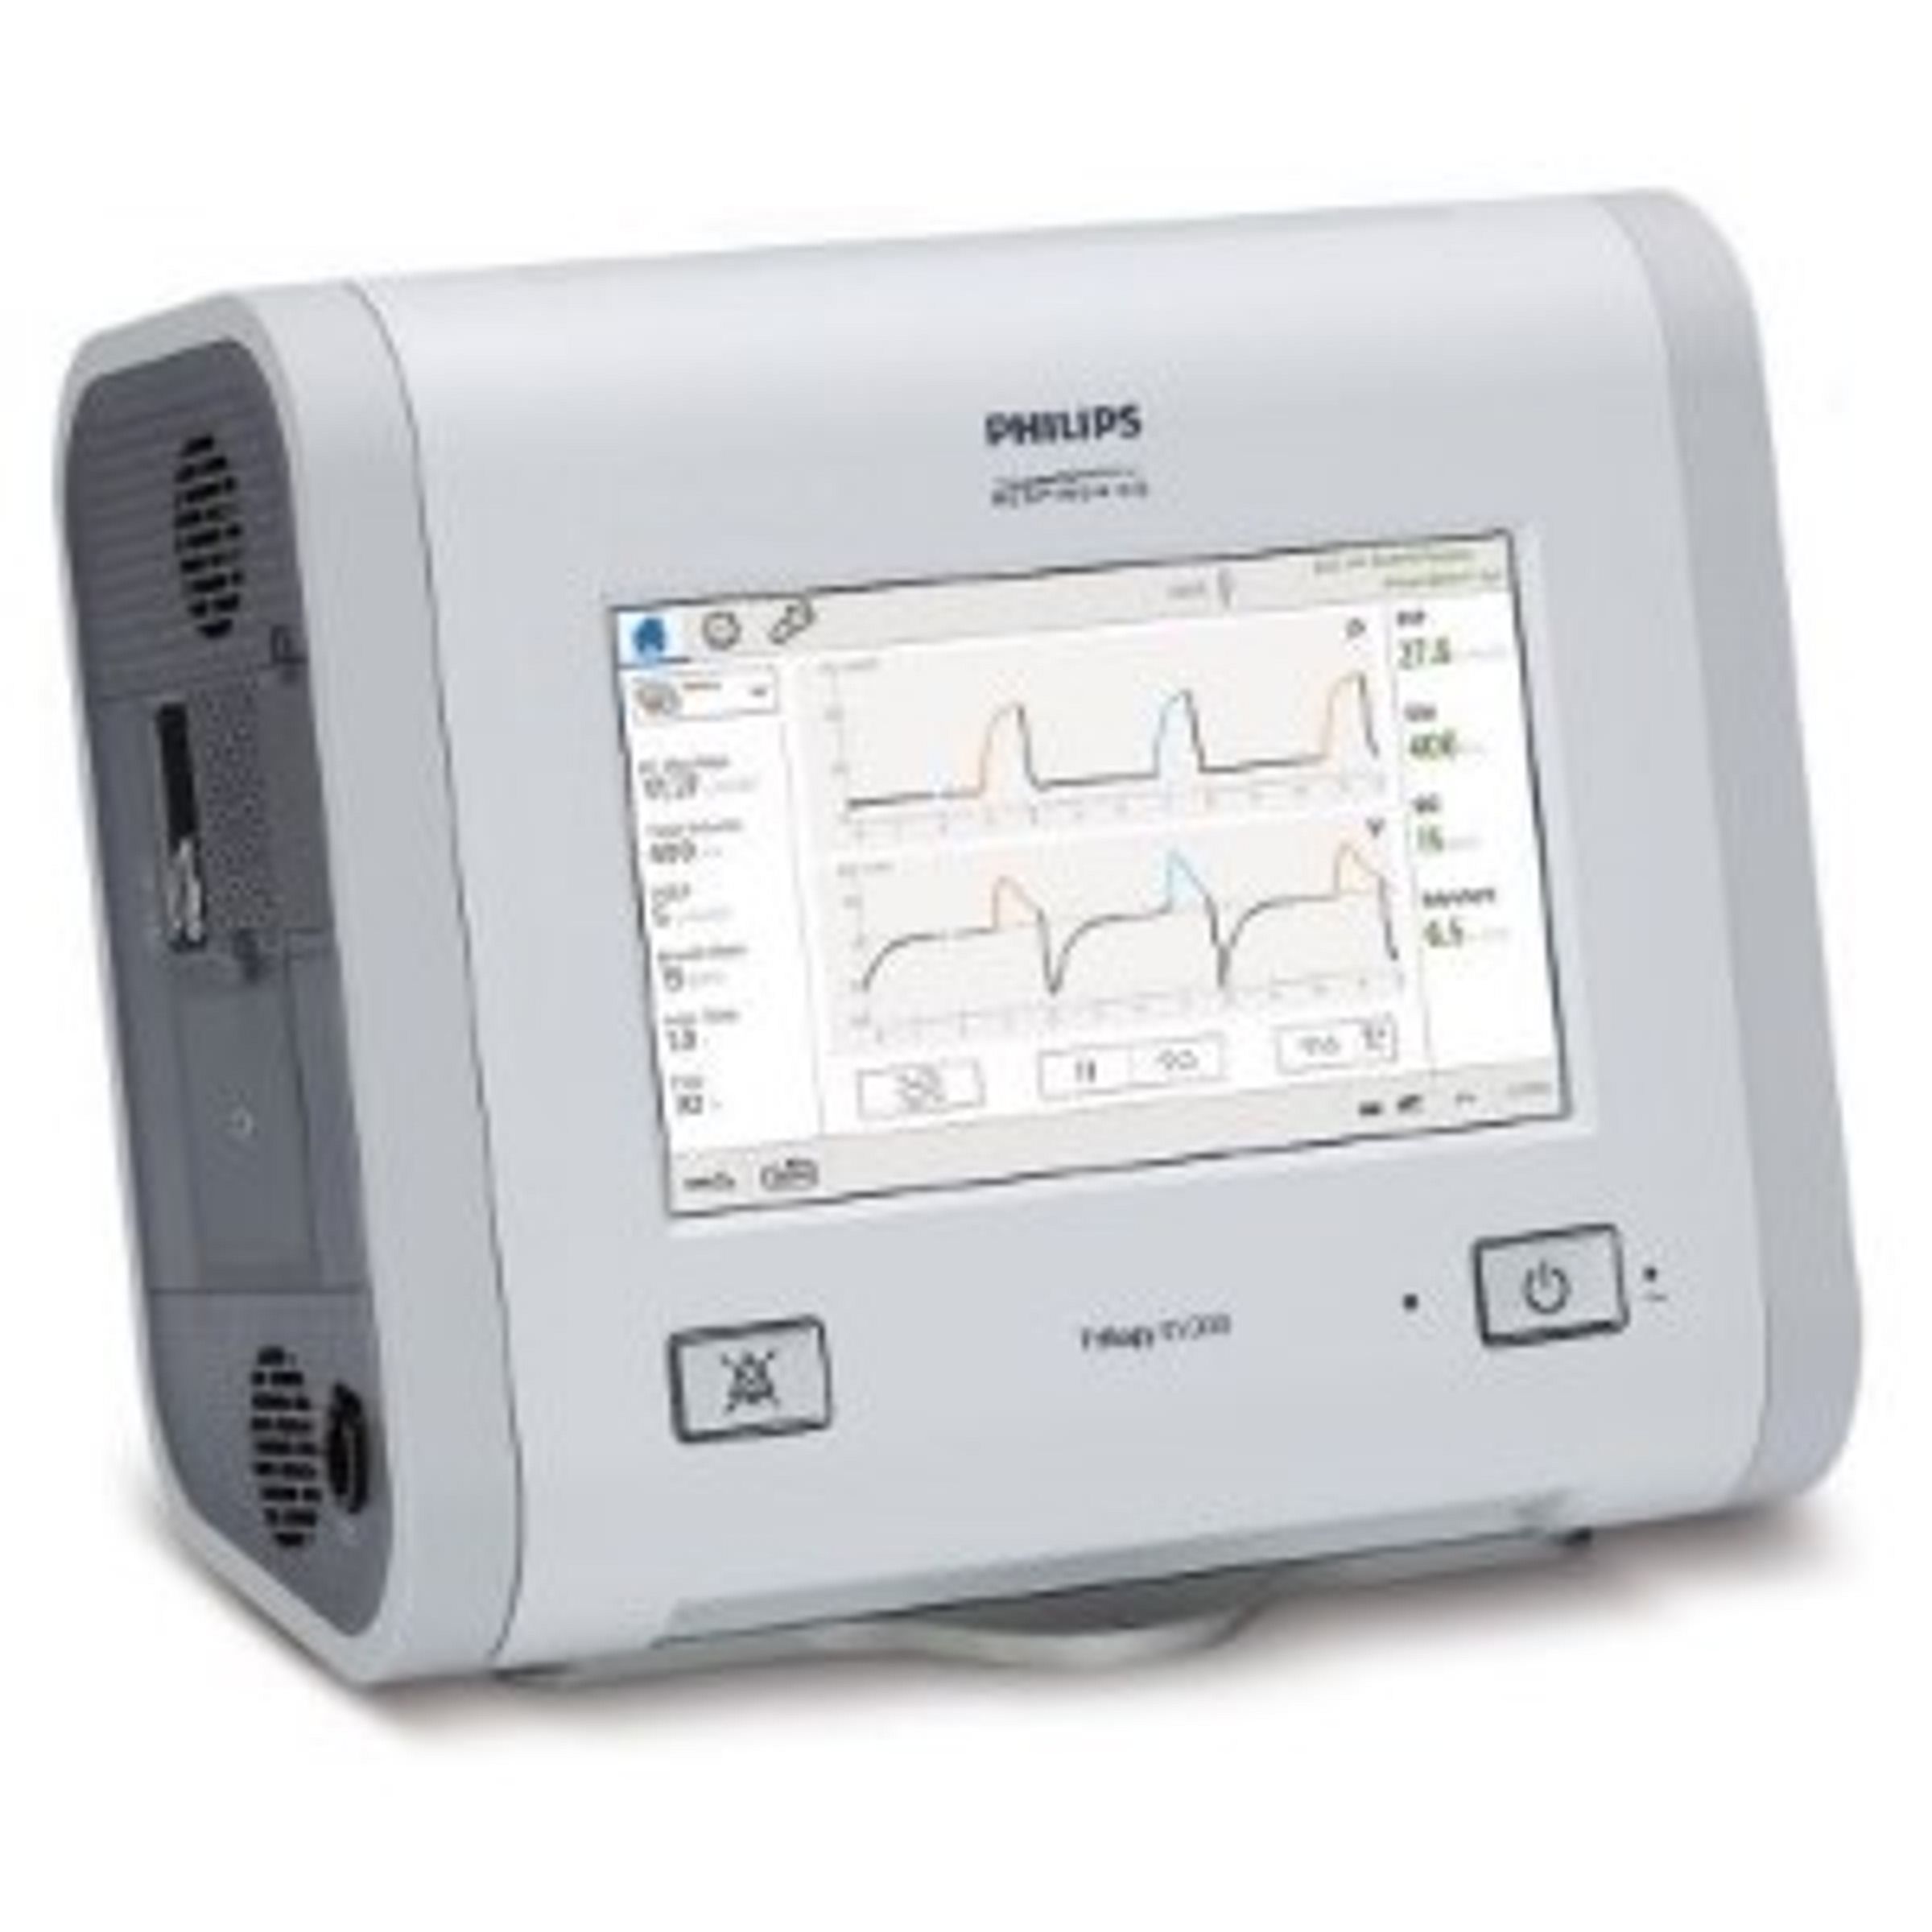 A product photo of the Philips Respironics Trilogy EV300